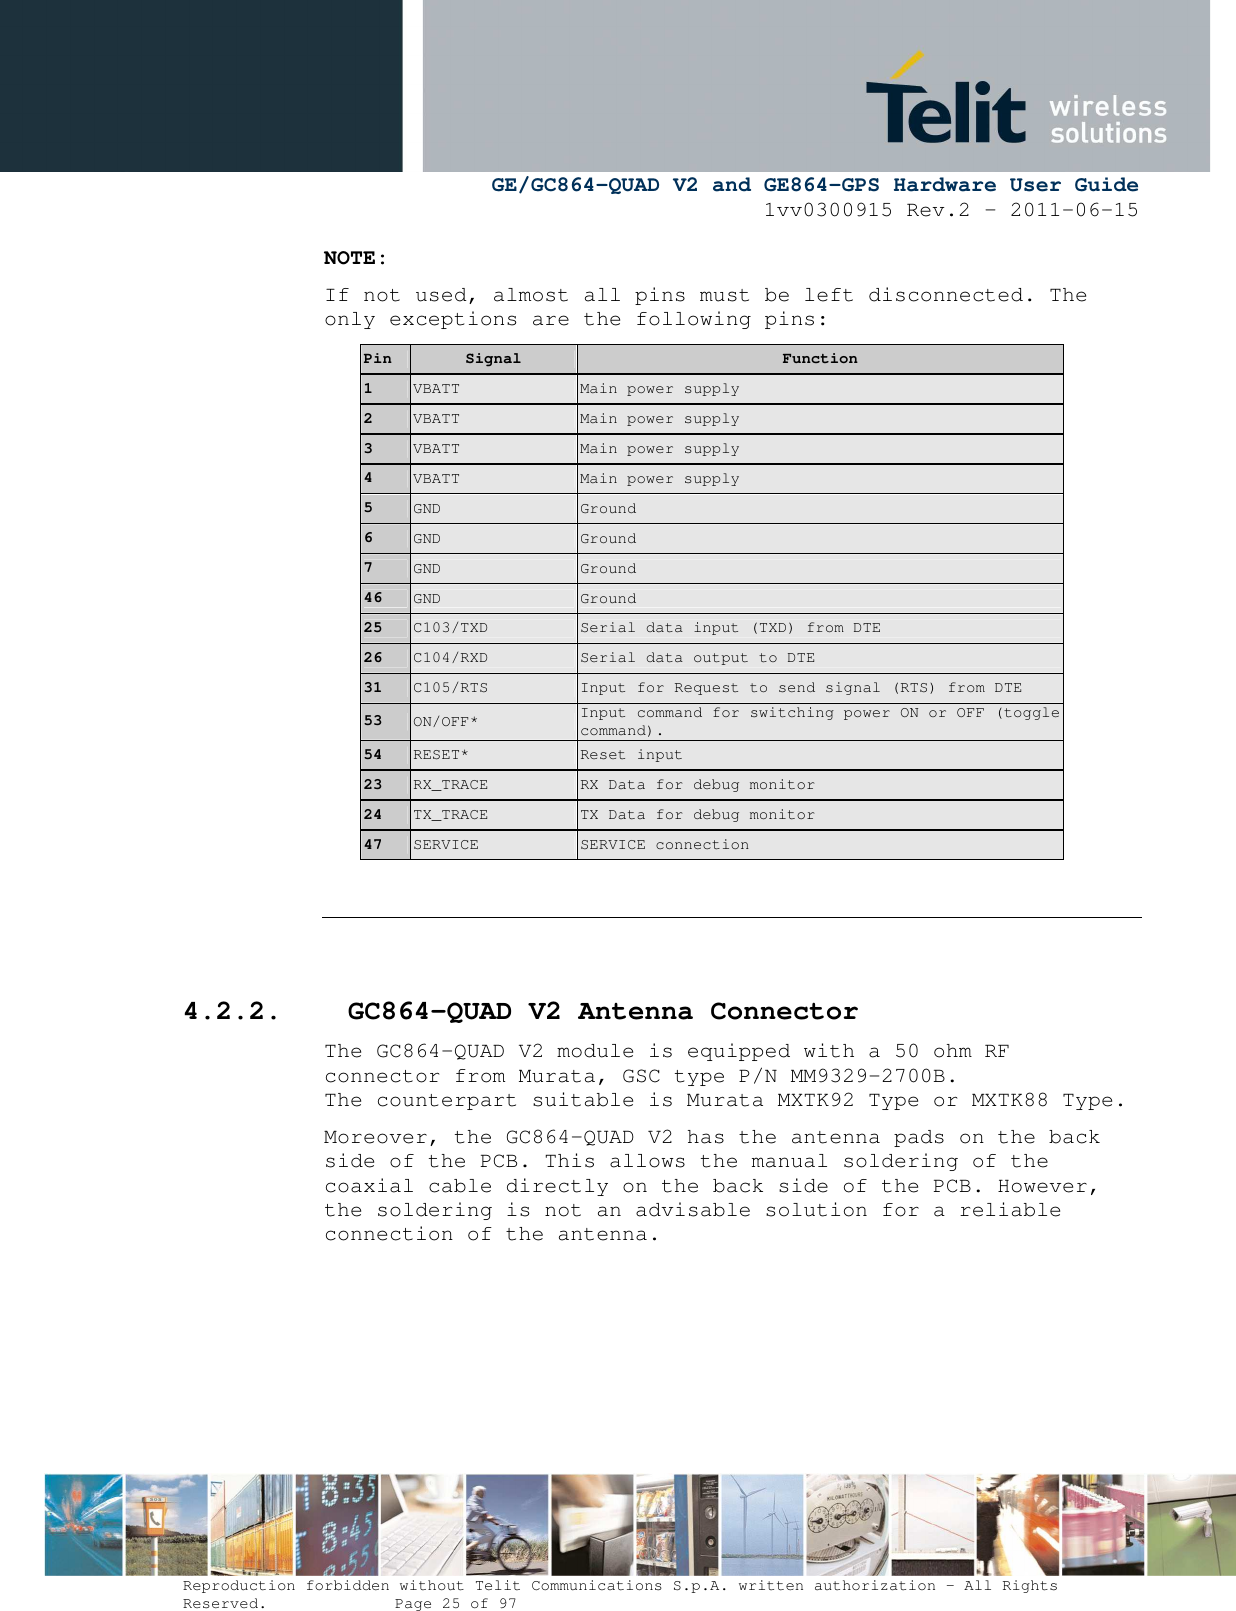      GE/GC864-QUAD V2 and GE864-GPS Hardware User Guide 1vv0300915 Rev.2 – 2011-06-15  Reproduction forbidden without Telit Communications S.p.A. written authorization - All Rights Reserved.    Page 25 of 97  NOTE: If not used, almost all pins must be left disconnected. The only exceptions are the following pins: Pin  Signal  Function 1  VBATT  Main power supply 2  VBATT  Main power supply 3  VBATT  Main power supply 4  VBATT  Main power supply 5  GND  Ground 6  GND  Ground 7  GND  Ground 46  GND  Ground 25  C103/TXD  Serial data input (TXD) from DTE  26  C104/RXD  Serial data output to DTE  31  C105/RTS  Input for Request to send signal (RTS) from DTE  53  ON/OFF* Input command for switching power ON or OFF (toggle command).  54  RESET*  Reset input 23  RX_TRACE  RX Data for debug monitor 24  TX_TRACE  TX Data for debug monitor 47  SERVICE  SERVICE connection    4.2.2. GC864-QUAD V2 Antenna Connector The GC864-QUAD V2 module is equipped with a 50 ohm RF connector from Murata, GSC type P/N MM9329-2700B. The counterpart suitable is Murata MXTK92 Type or MXTK88 Type. Moreover, the GC864-QUAD V2 has the antenna pads on the back side of the PCB. This allows the manual soldering of the coaxial cable directly on the back side of the PCB. However, the soldering is not an advisable solution for a reliable connection of the antenna.   